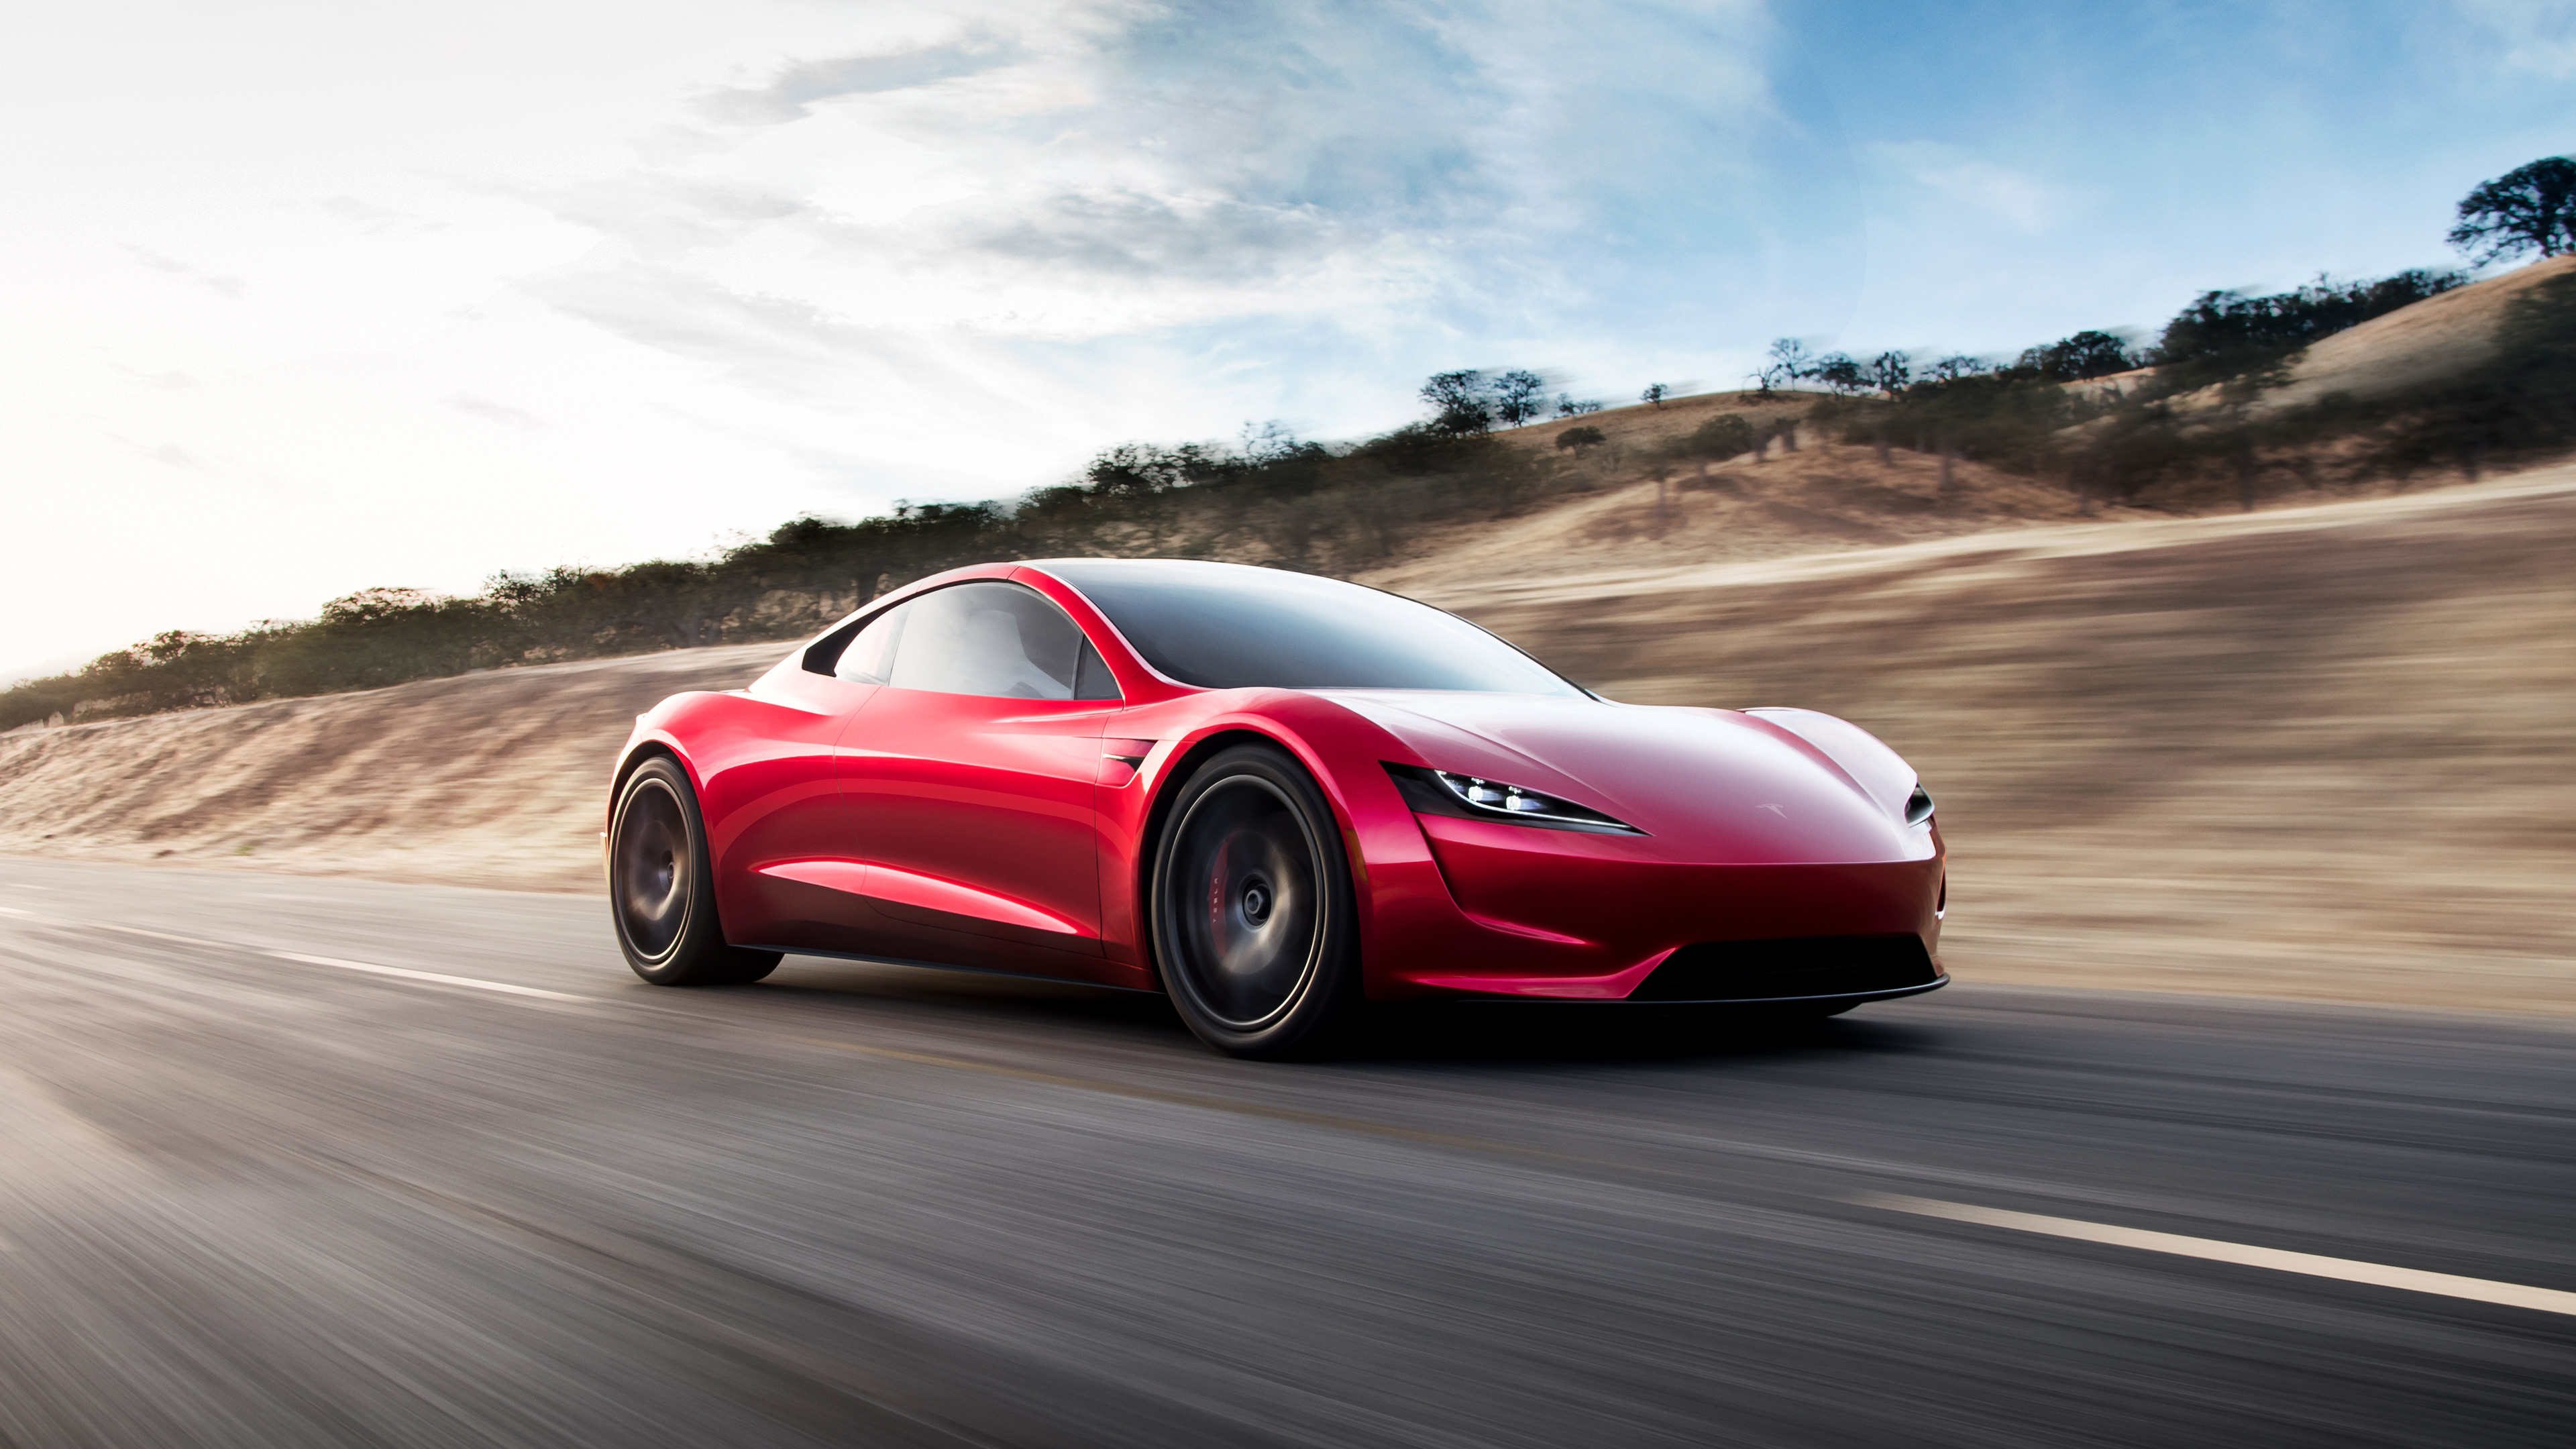 Free photo Red Tesla roadster goes down the road at high speed